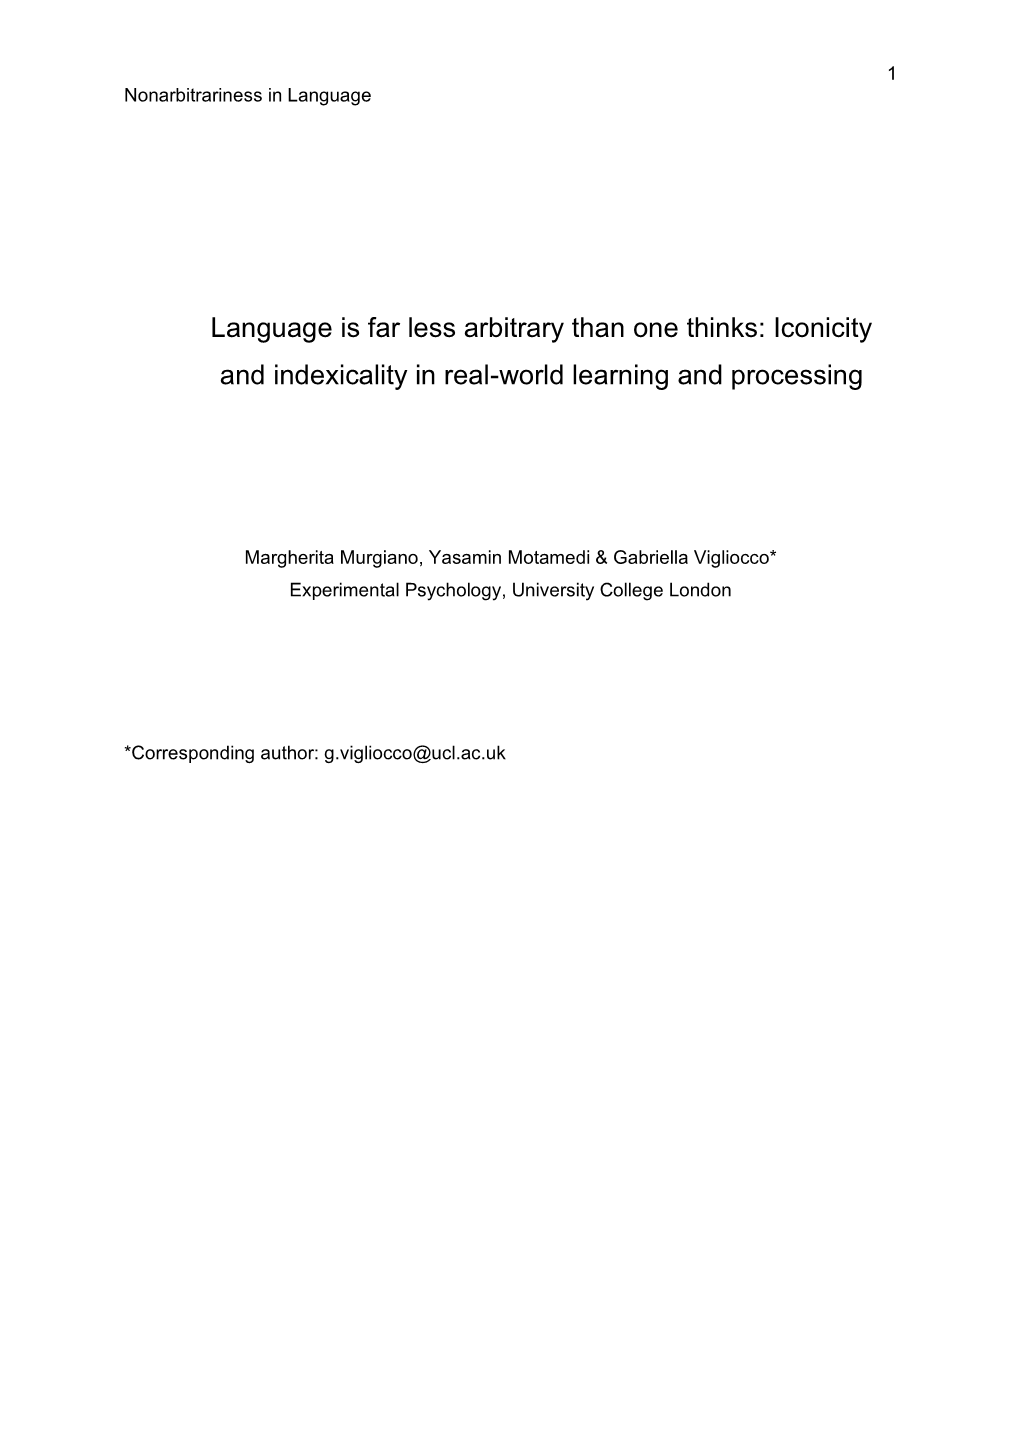 Language Is Far Less Arbitrary Than One Thinks: Iconicity and Indexicality in Real-World Learning and Processing